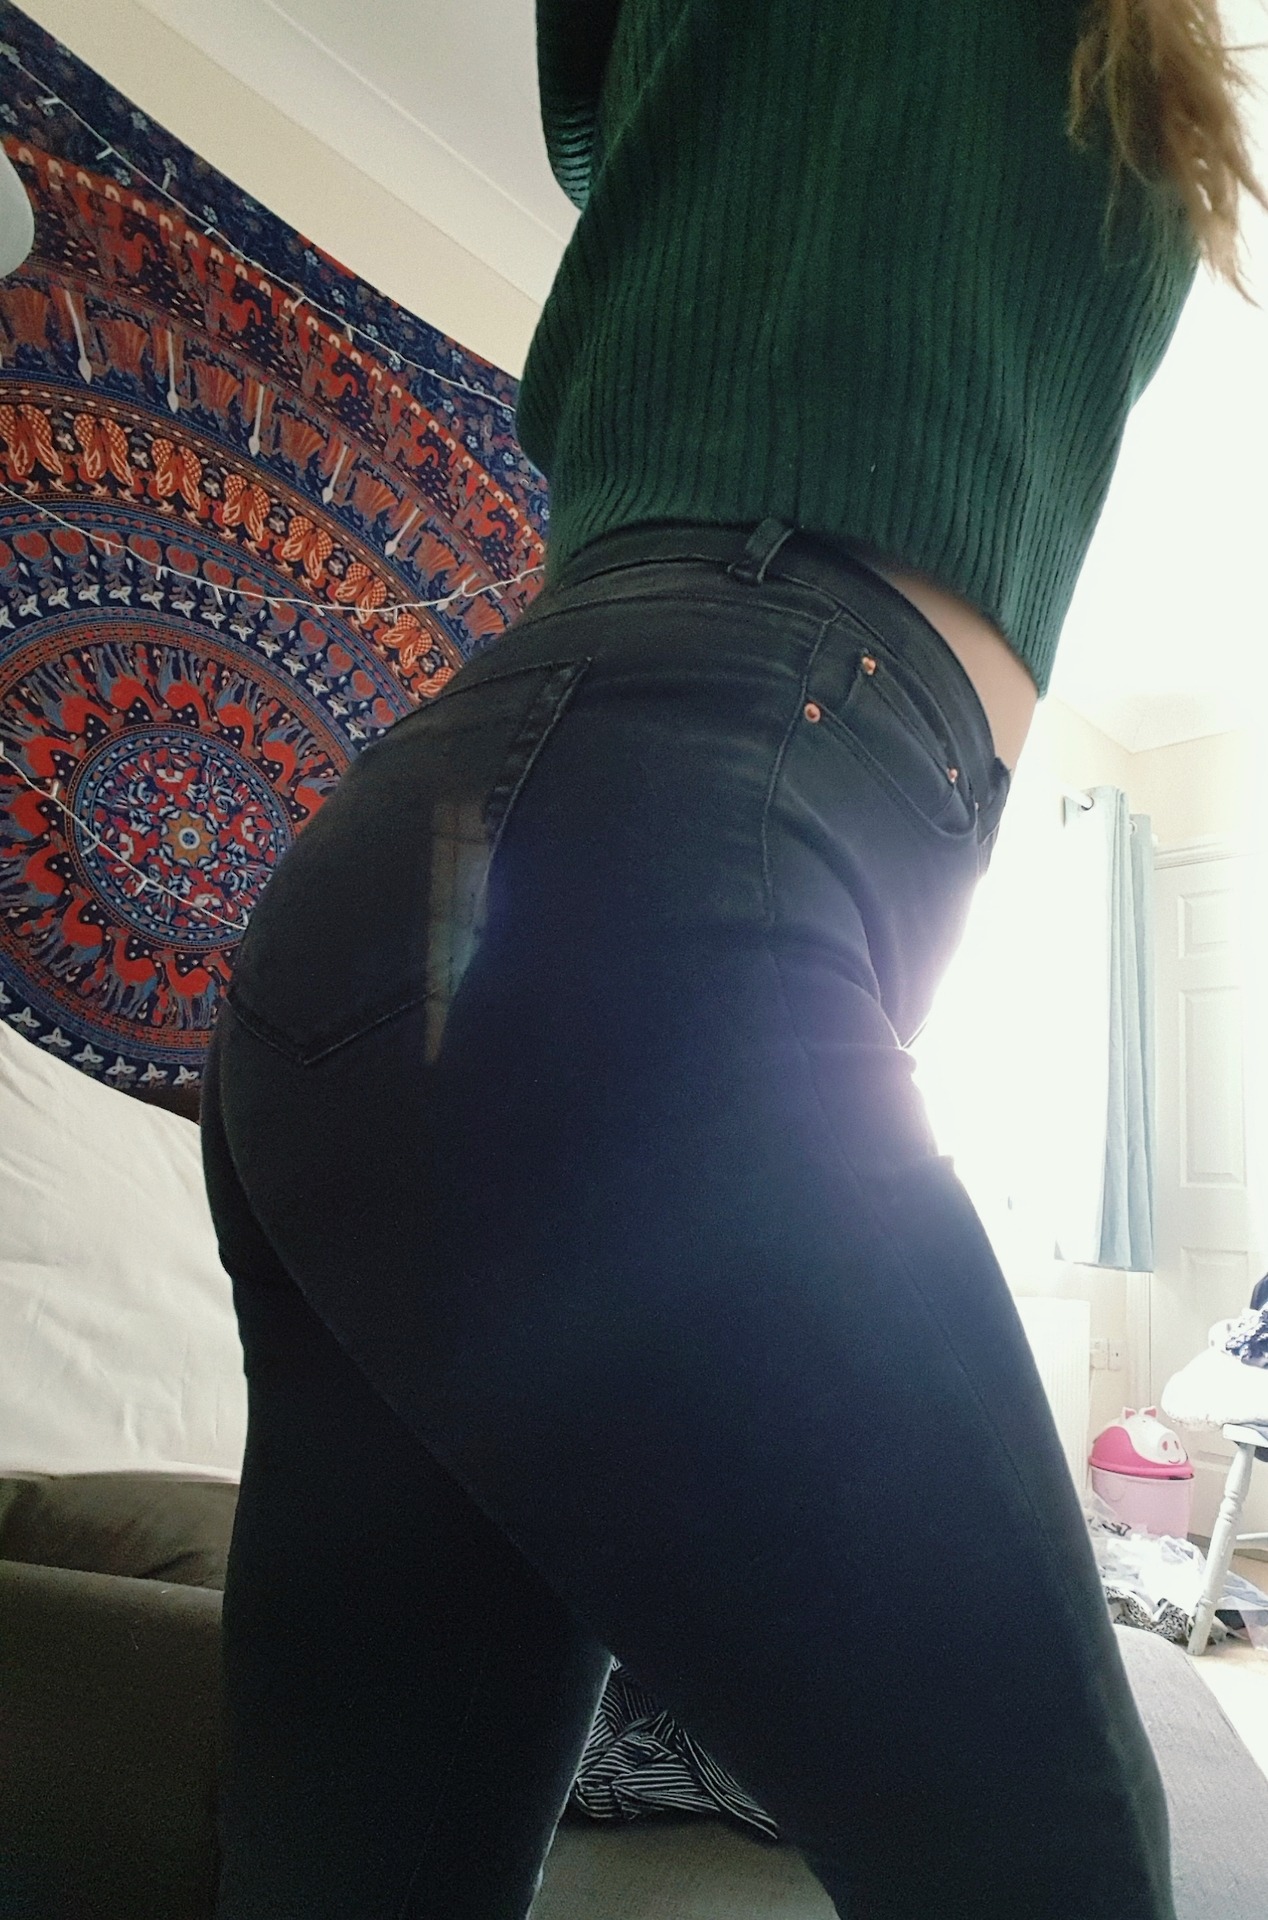 lil-spicypepper:  A lil jean butt action